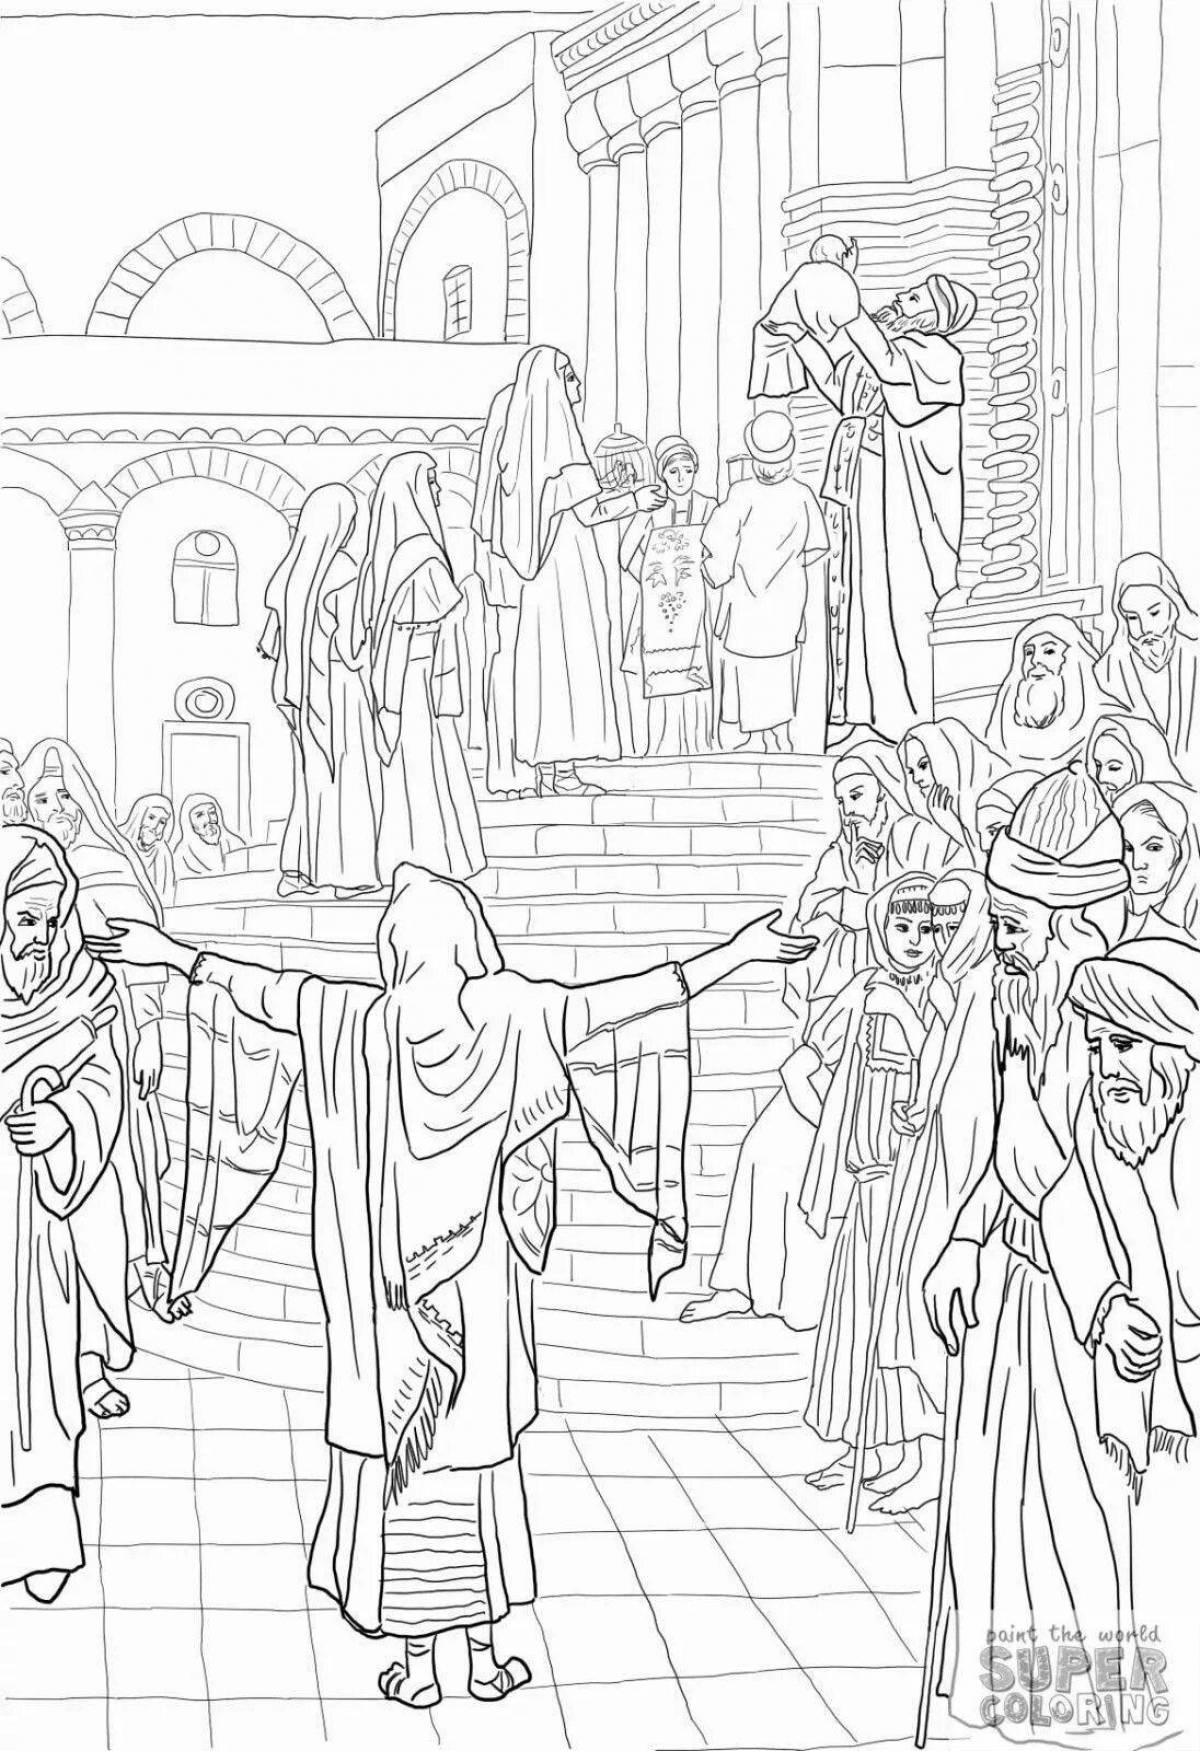 Coloring page exalted meeting of the lord